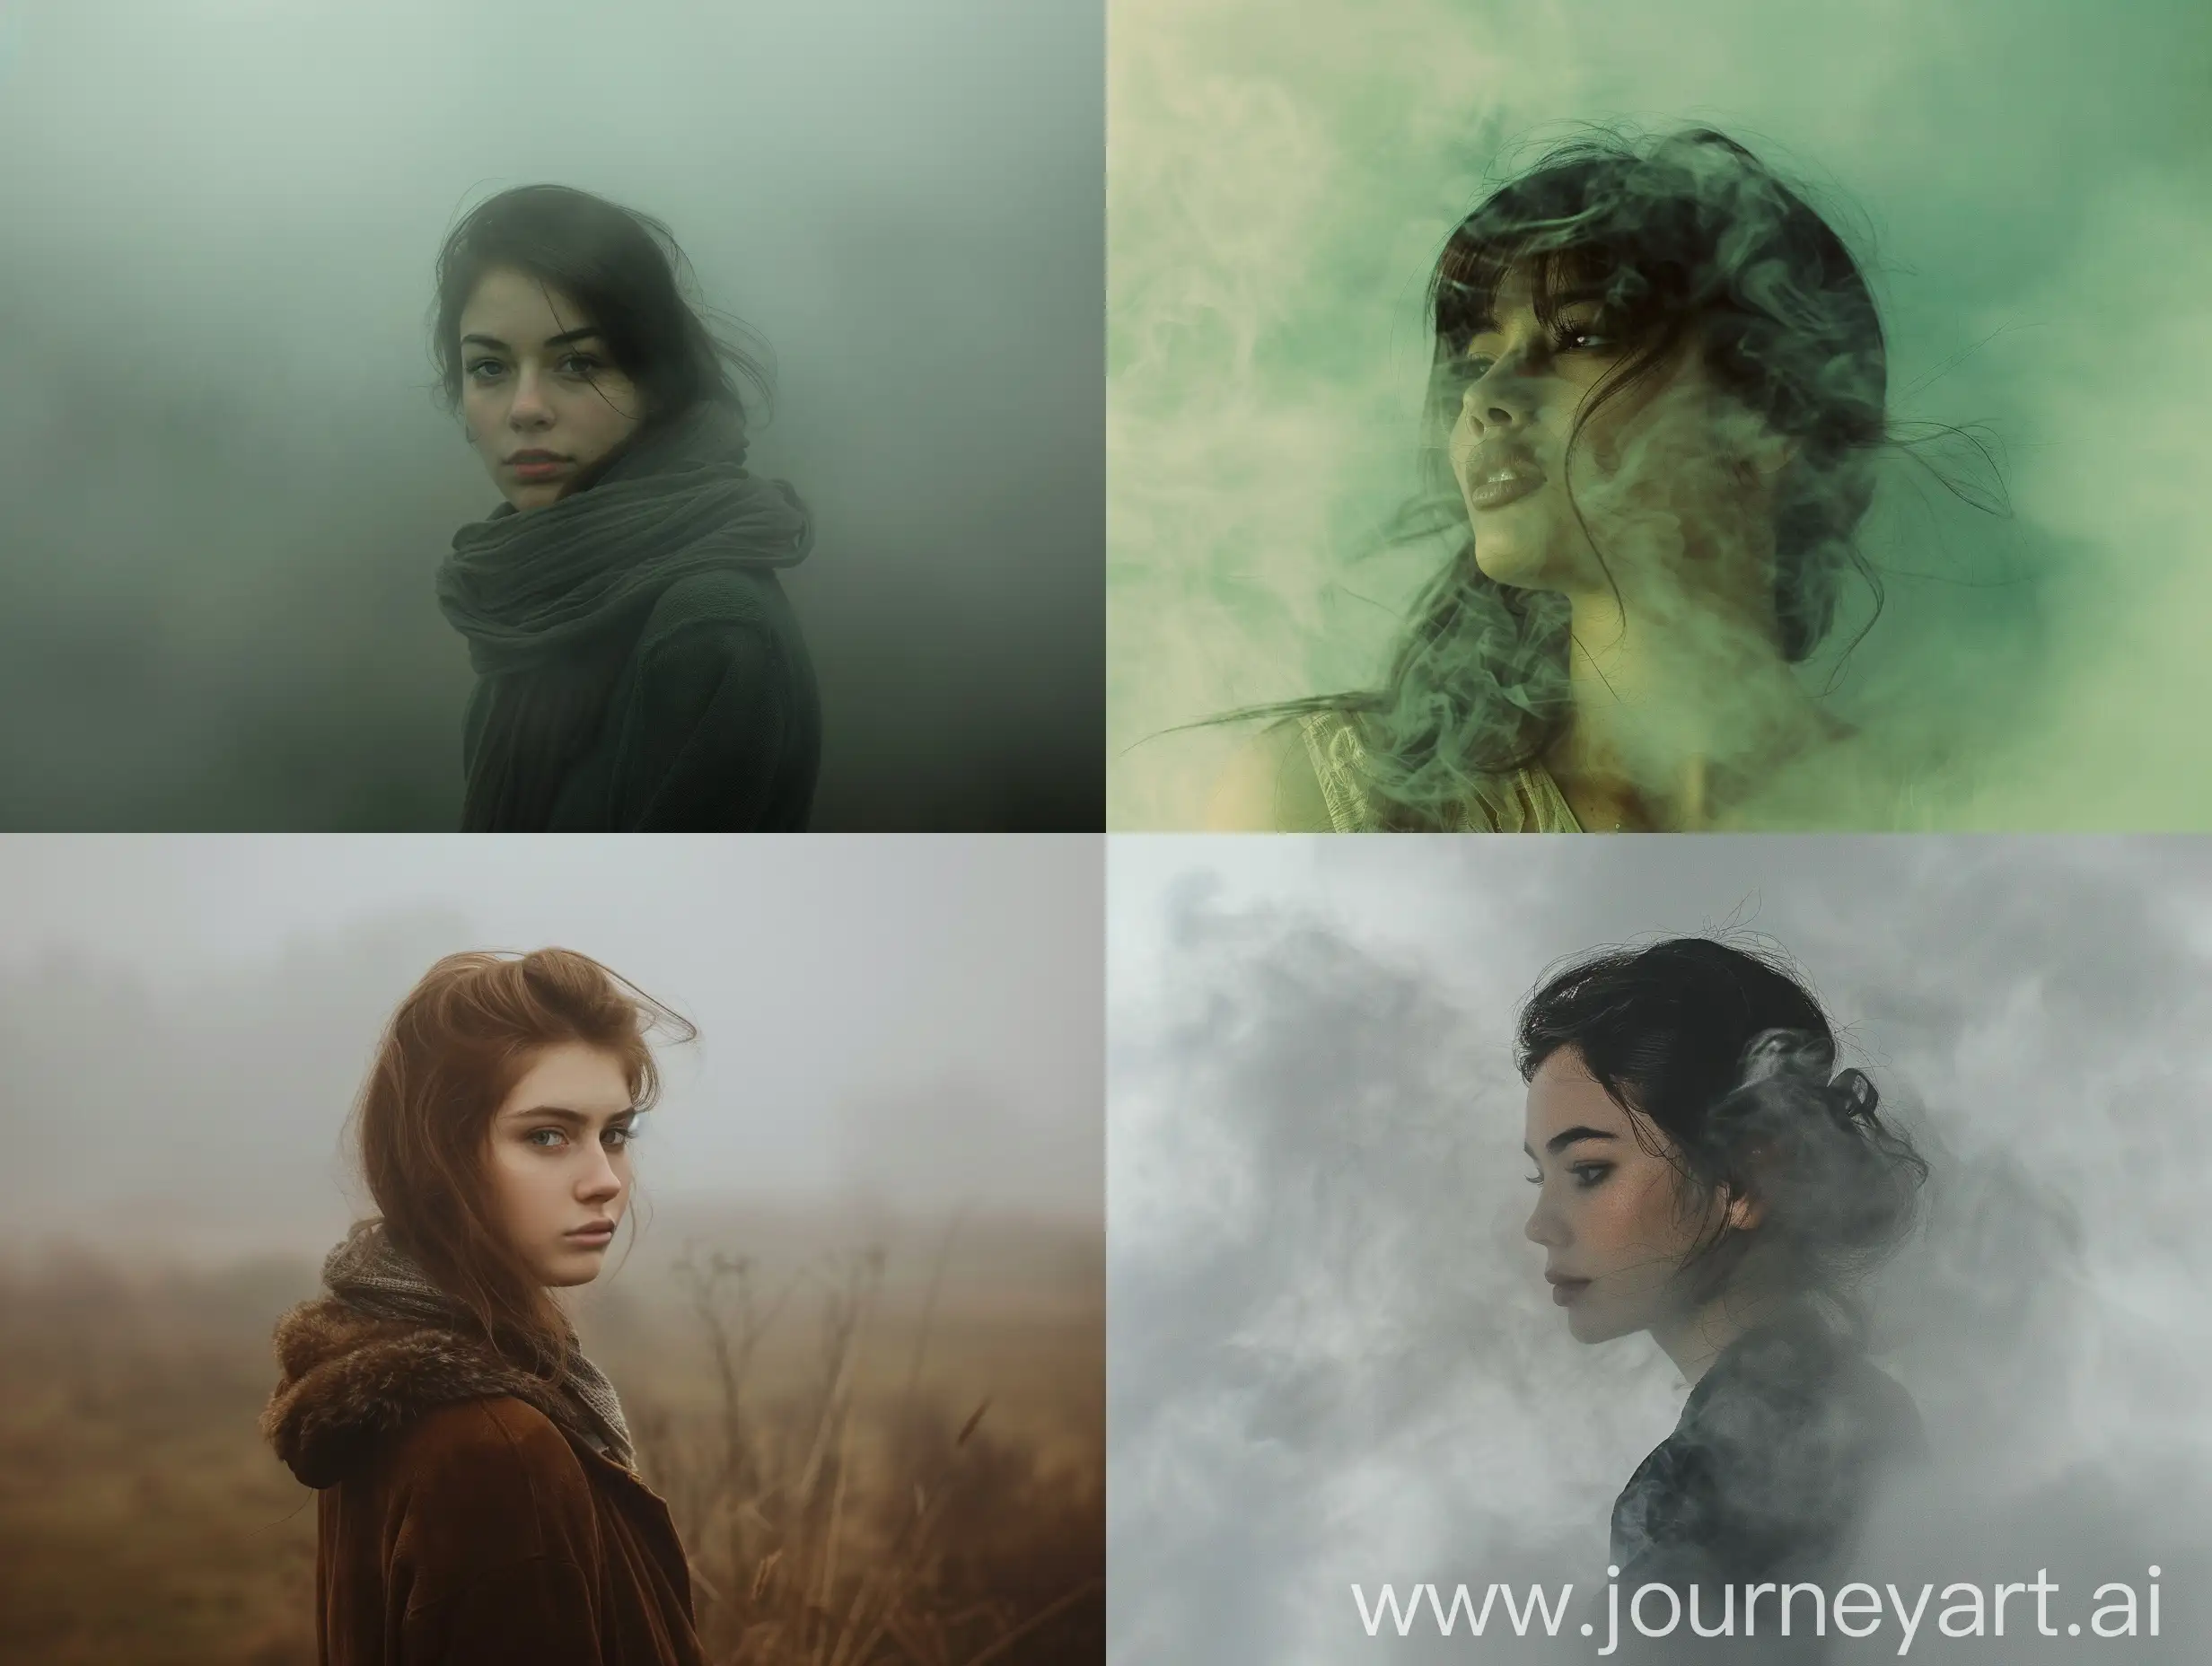 Mysterious-Woman-in-Foggy-Landscape